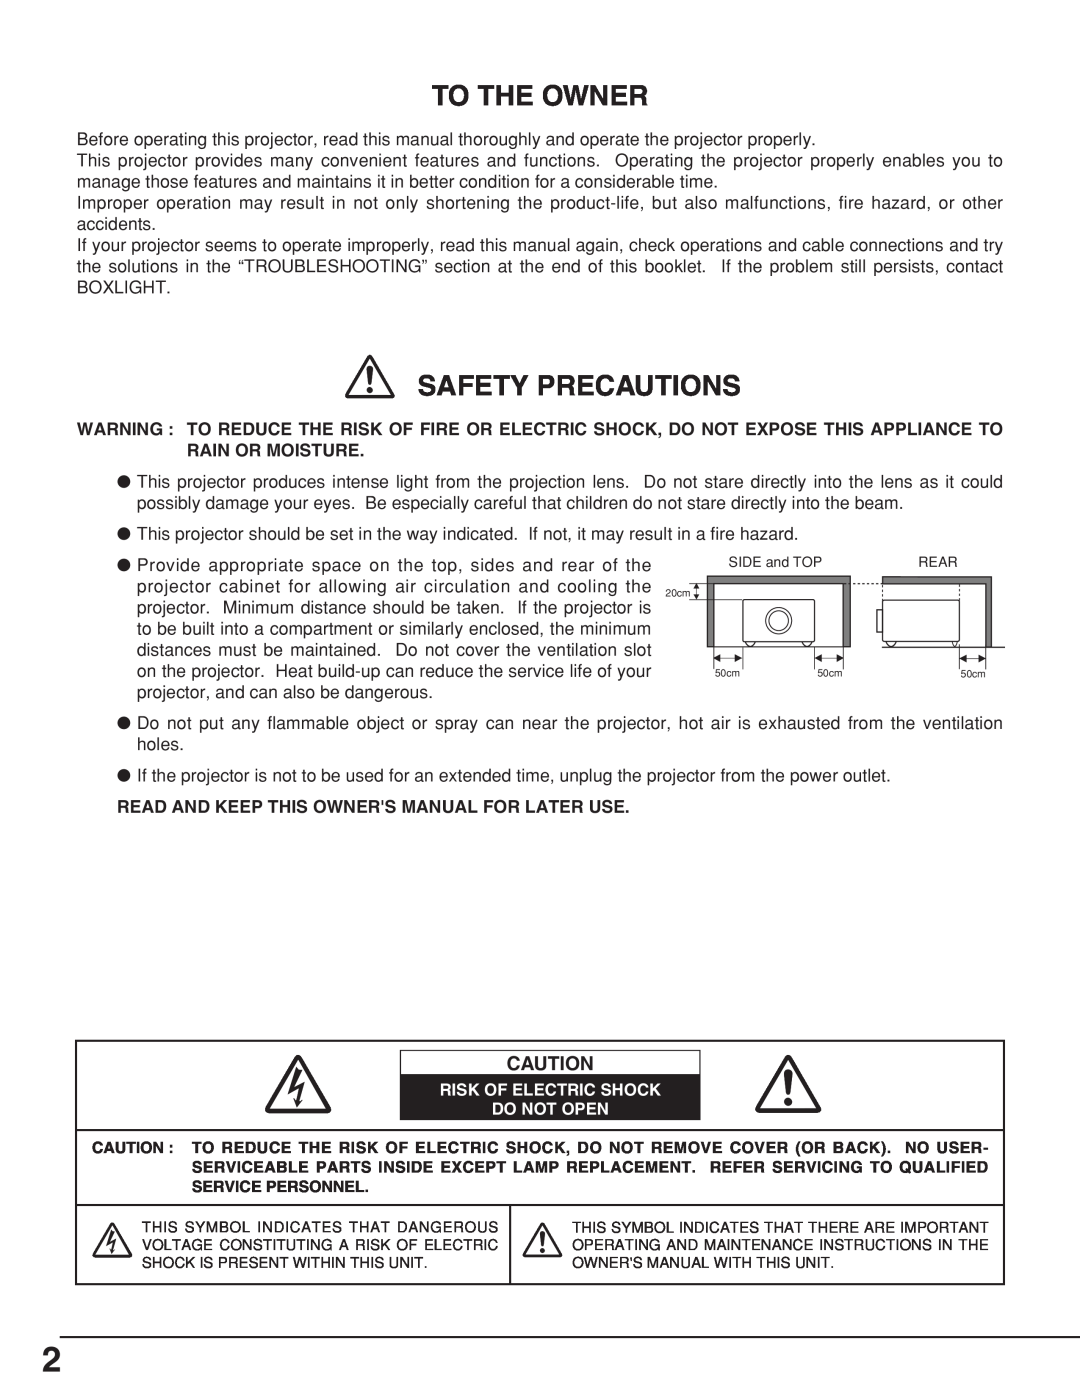 BOXLIGHT CP-306t manual To The Owner, Safety Precautions, Read And Keep This Owners Manual For Later Use 